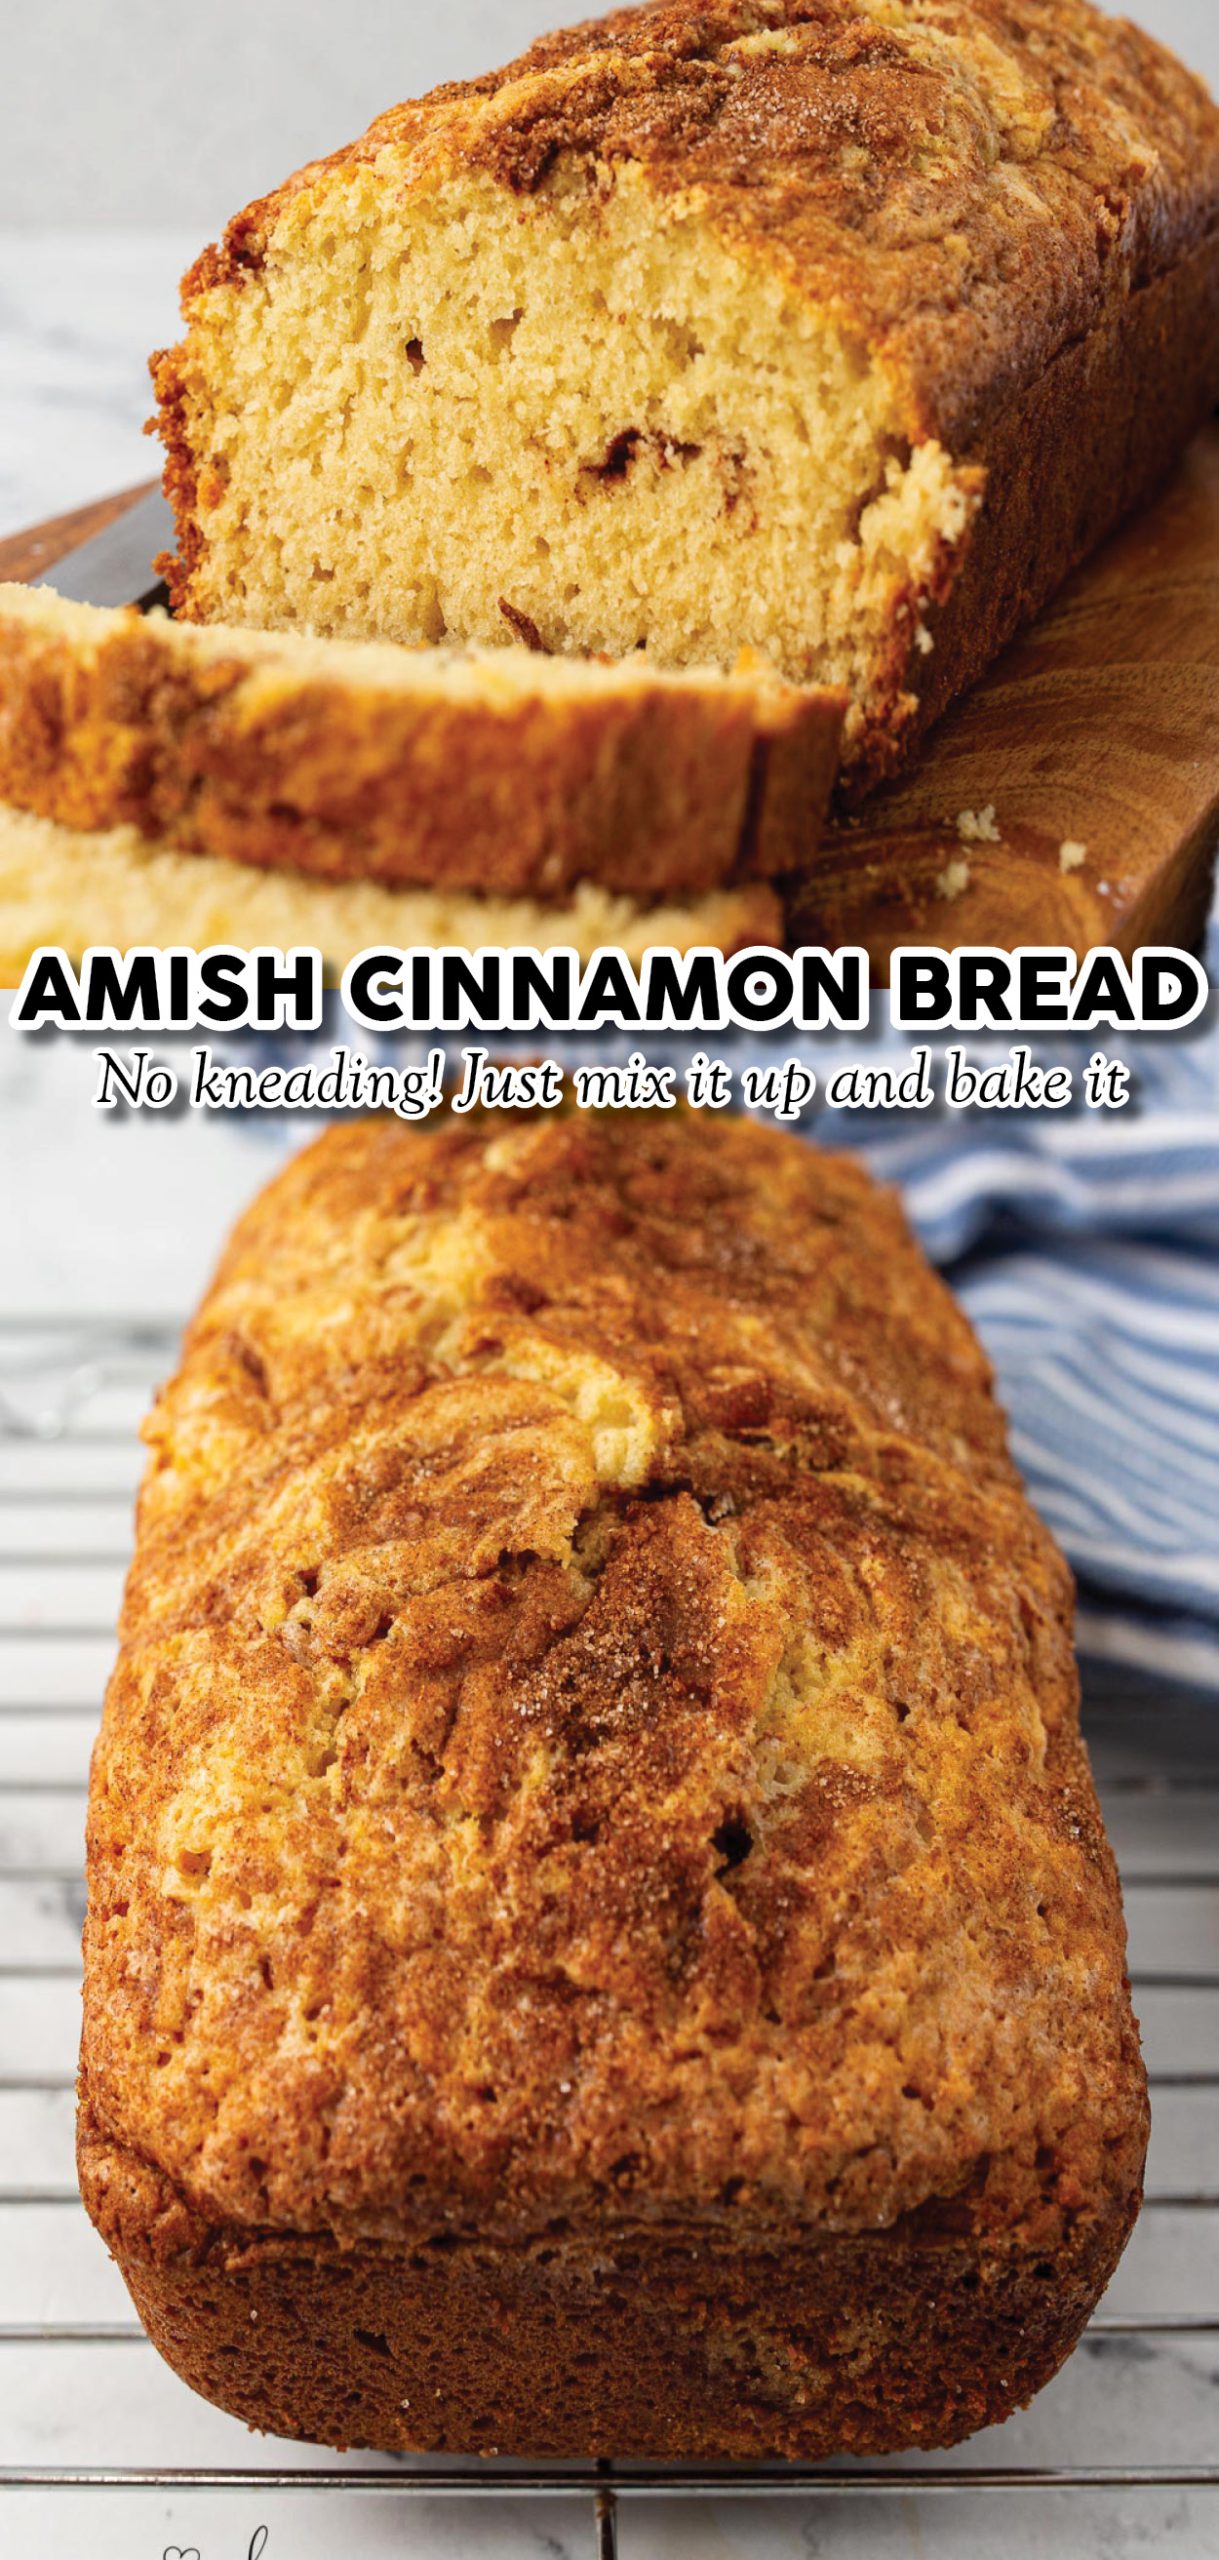 Bakery Style Amish Cinnamon Bread! No kneading, you just mix it up and bake it:)